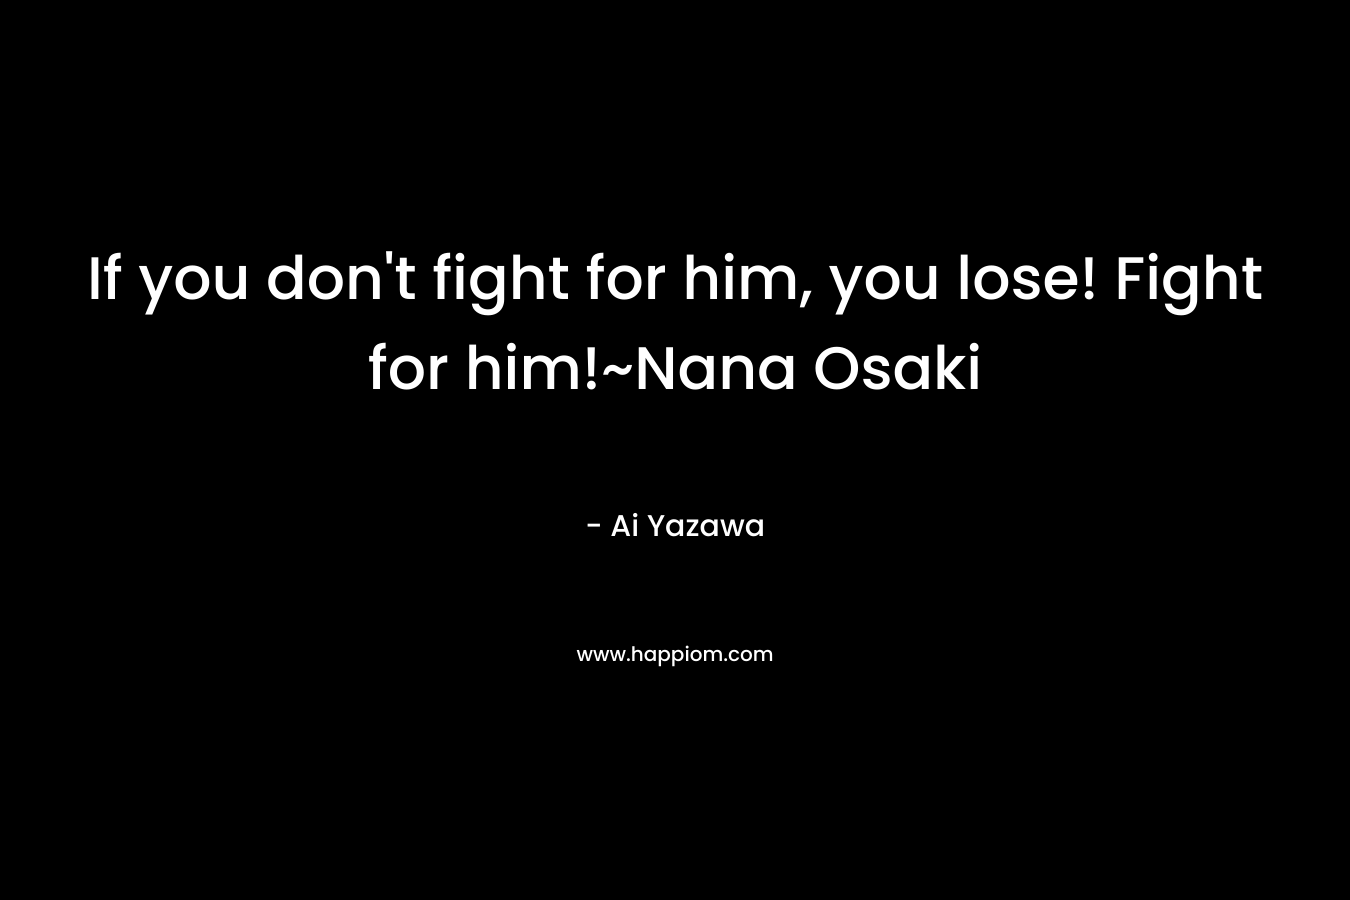 If you don't fight for him, you lose! Fight for him!~Nana Osaki